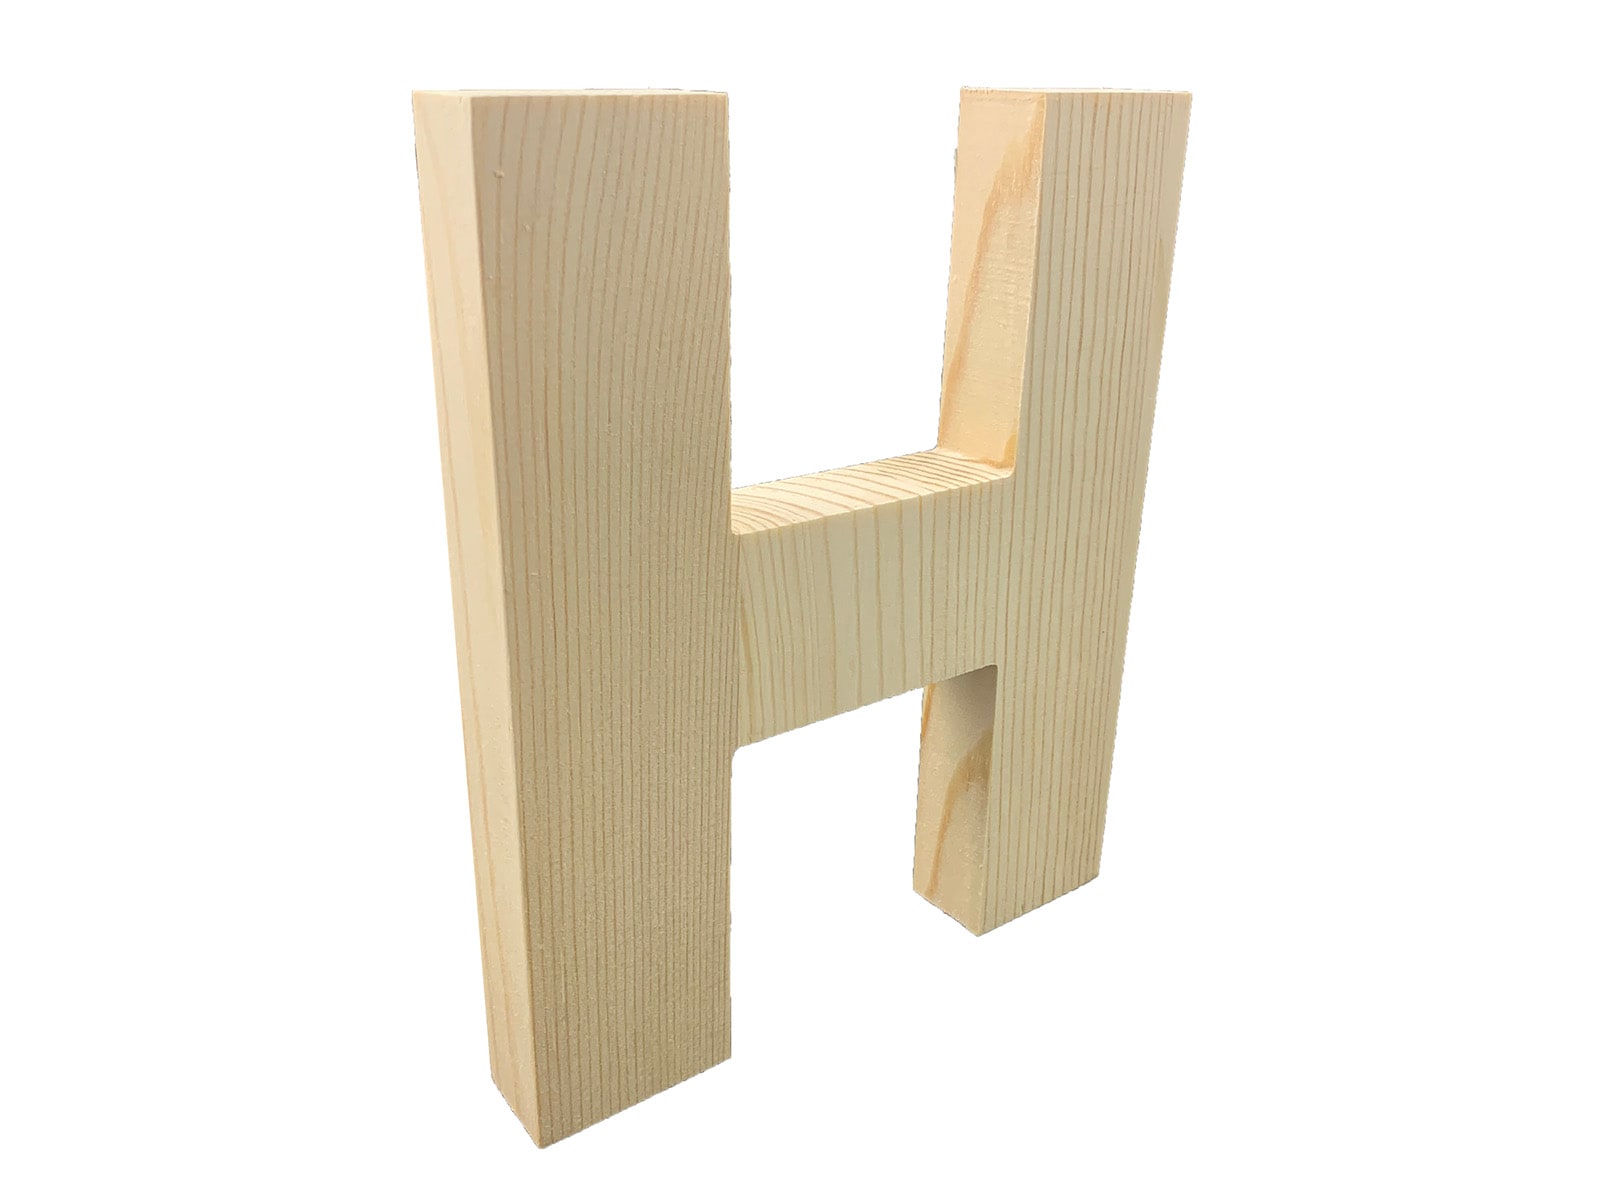 Wooden Letter K 12 inch or 8 inch, Unfinished Large Wood Letters for Crafts, Woodpeckers